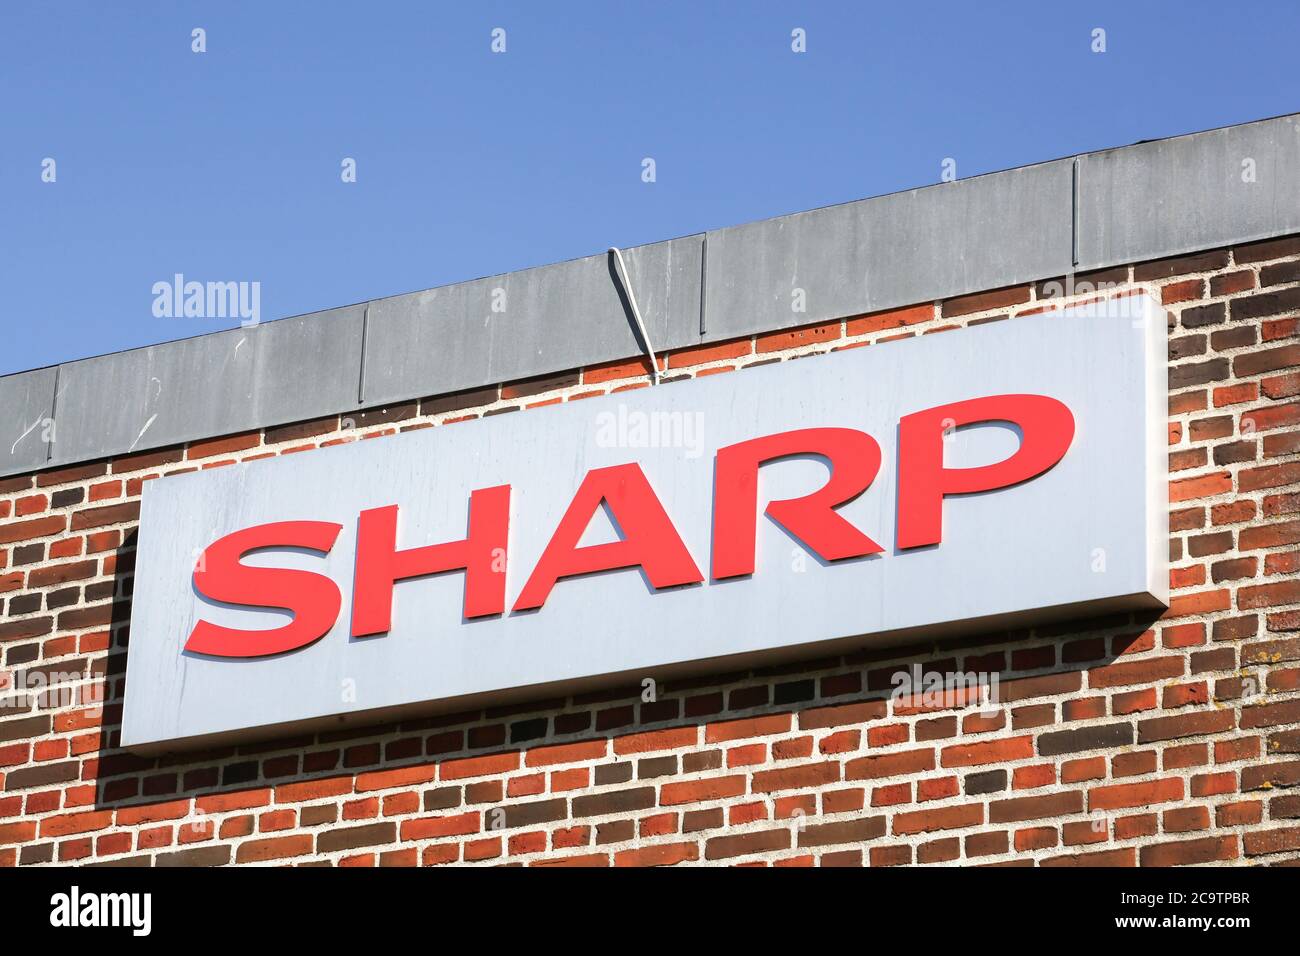 Ega, Denmark - May 11, 2019: Sharp logo on a facade. Sharp is a Japanese multinational corporation that designs and manufactures electronic products Stock Photo